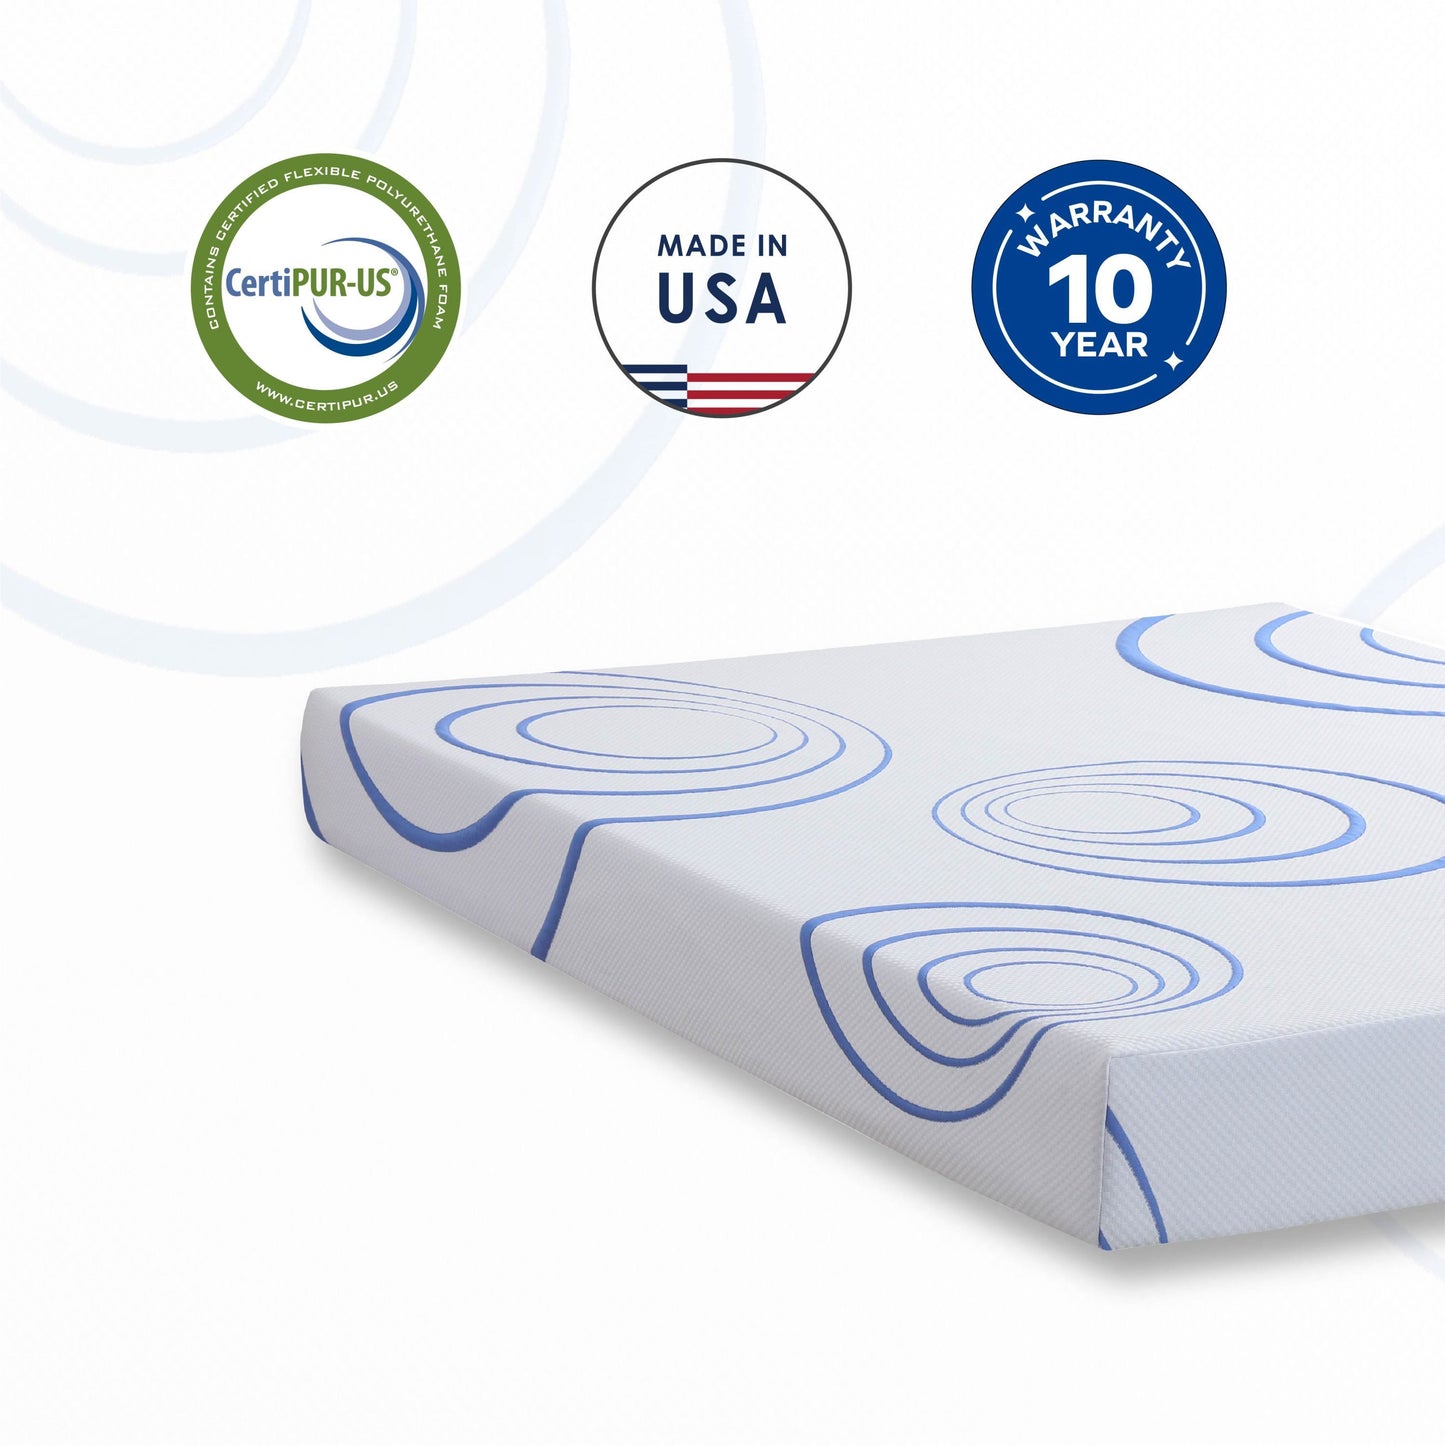 8 Inch Made in USA Bamboo Charcoal Infused Gel Memory Foam Mattress in a Box, CertiPUR-US Certified, CalKing Mattress with Fiberglass Free Cover, Medium